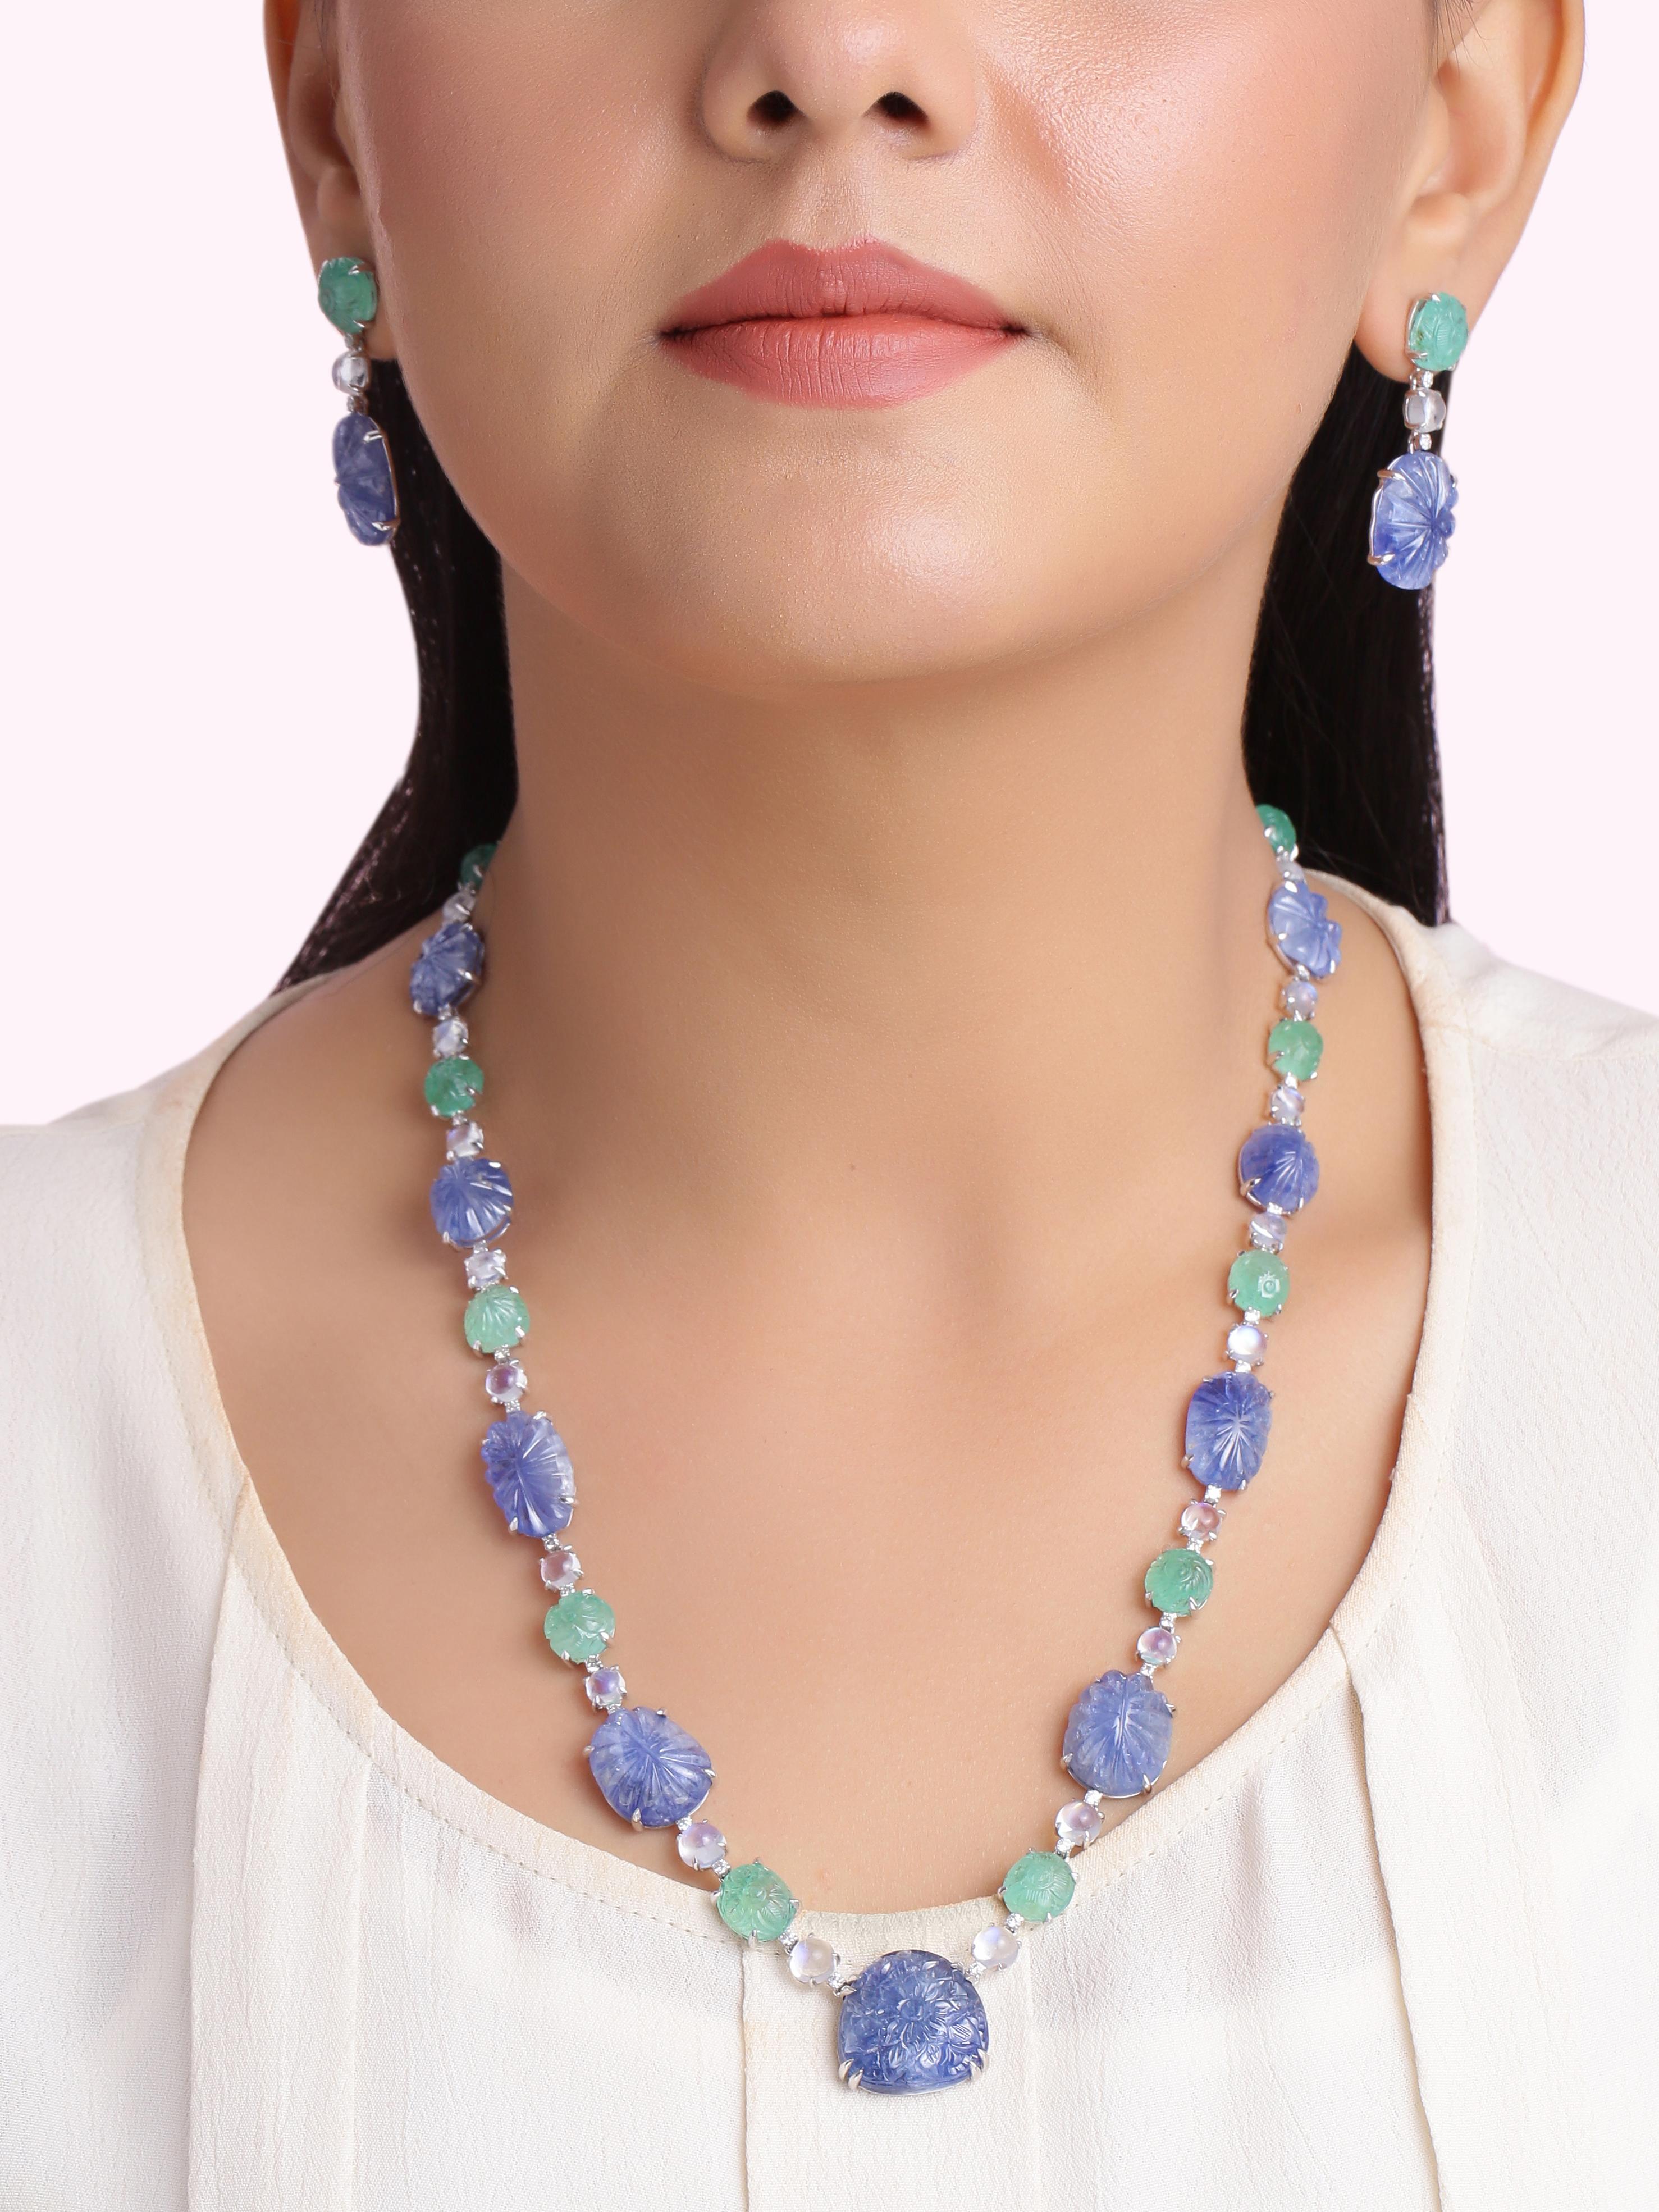 Women's Sapphire and Emerald Carved Necklace and Earring with Diamonds and Moonstone